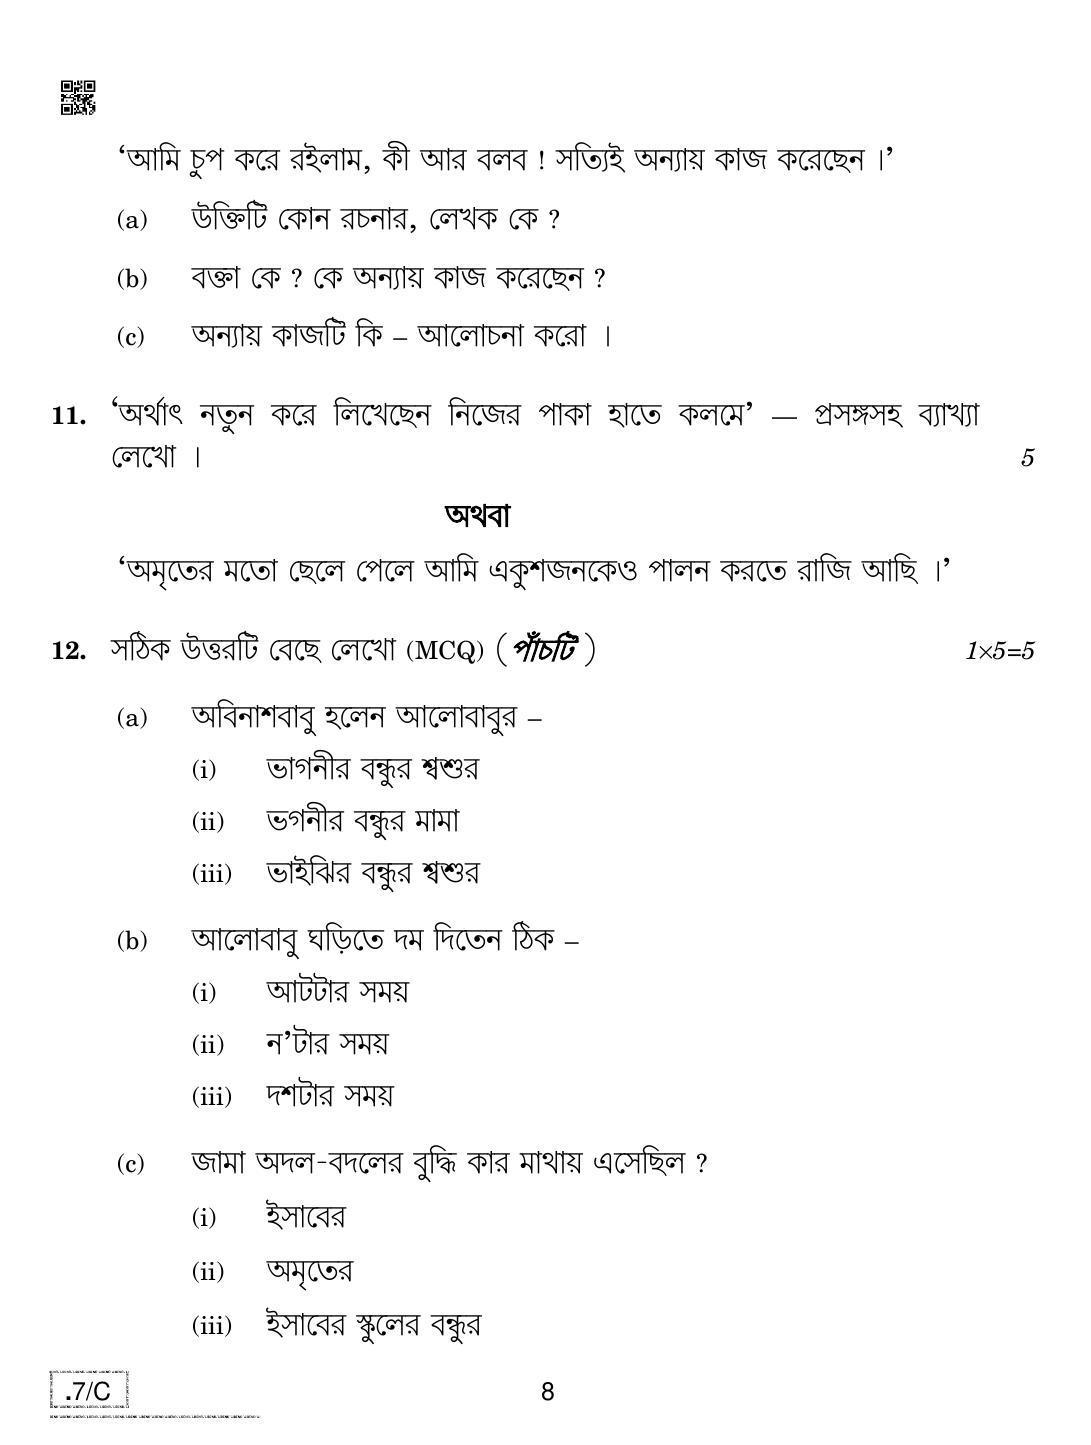 CBSE Class 10 Bengali 2020 Compartment Question Paper - Page 8